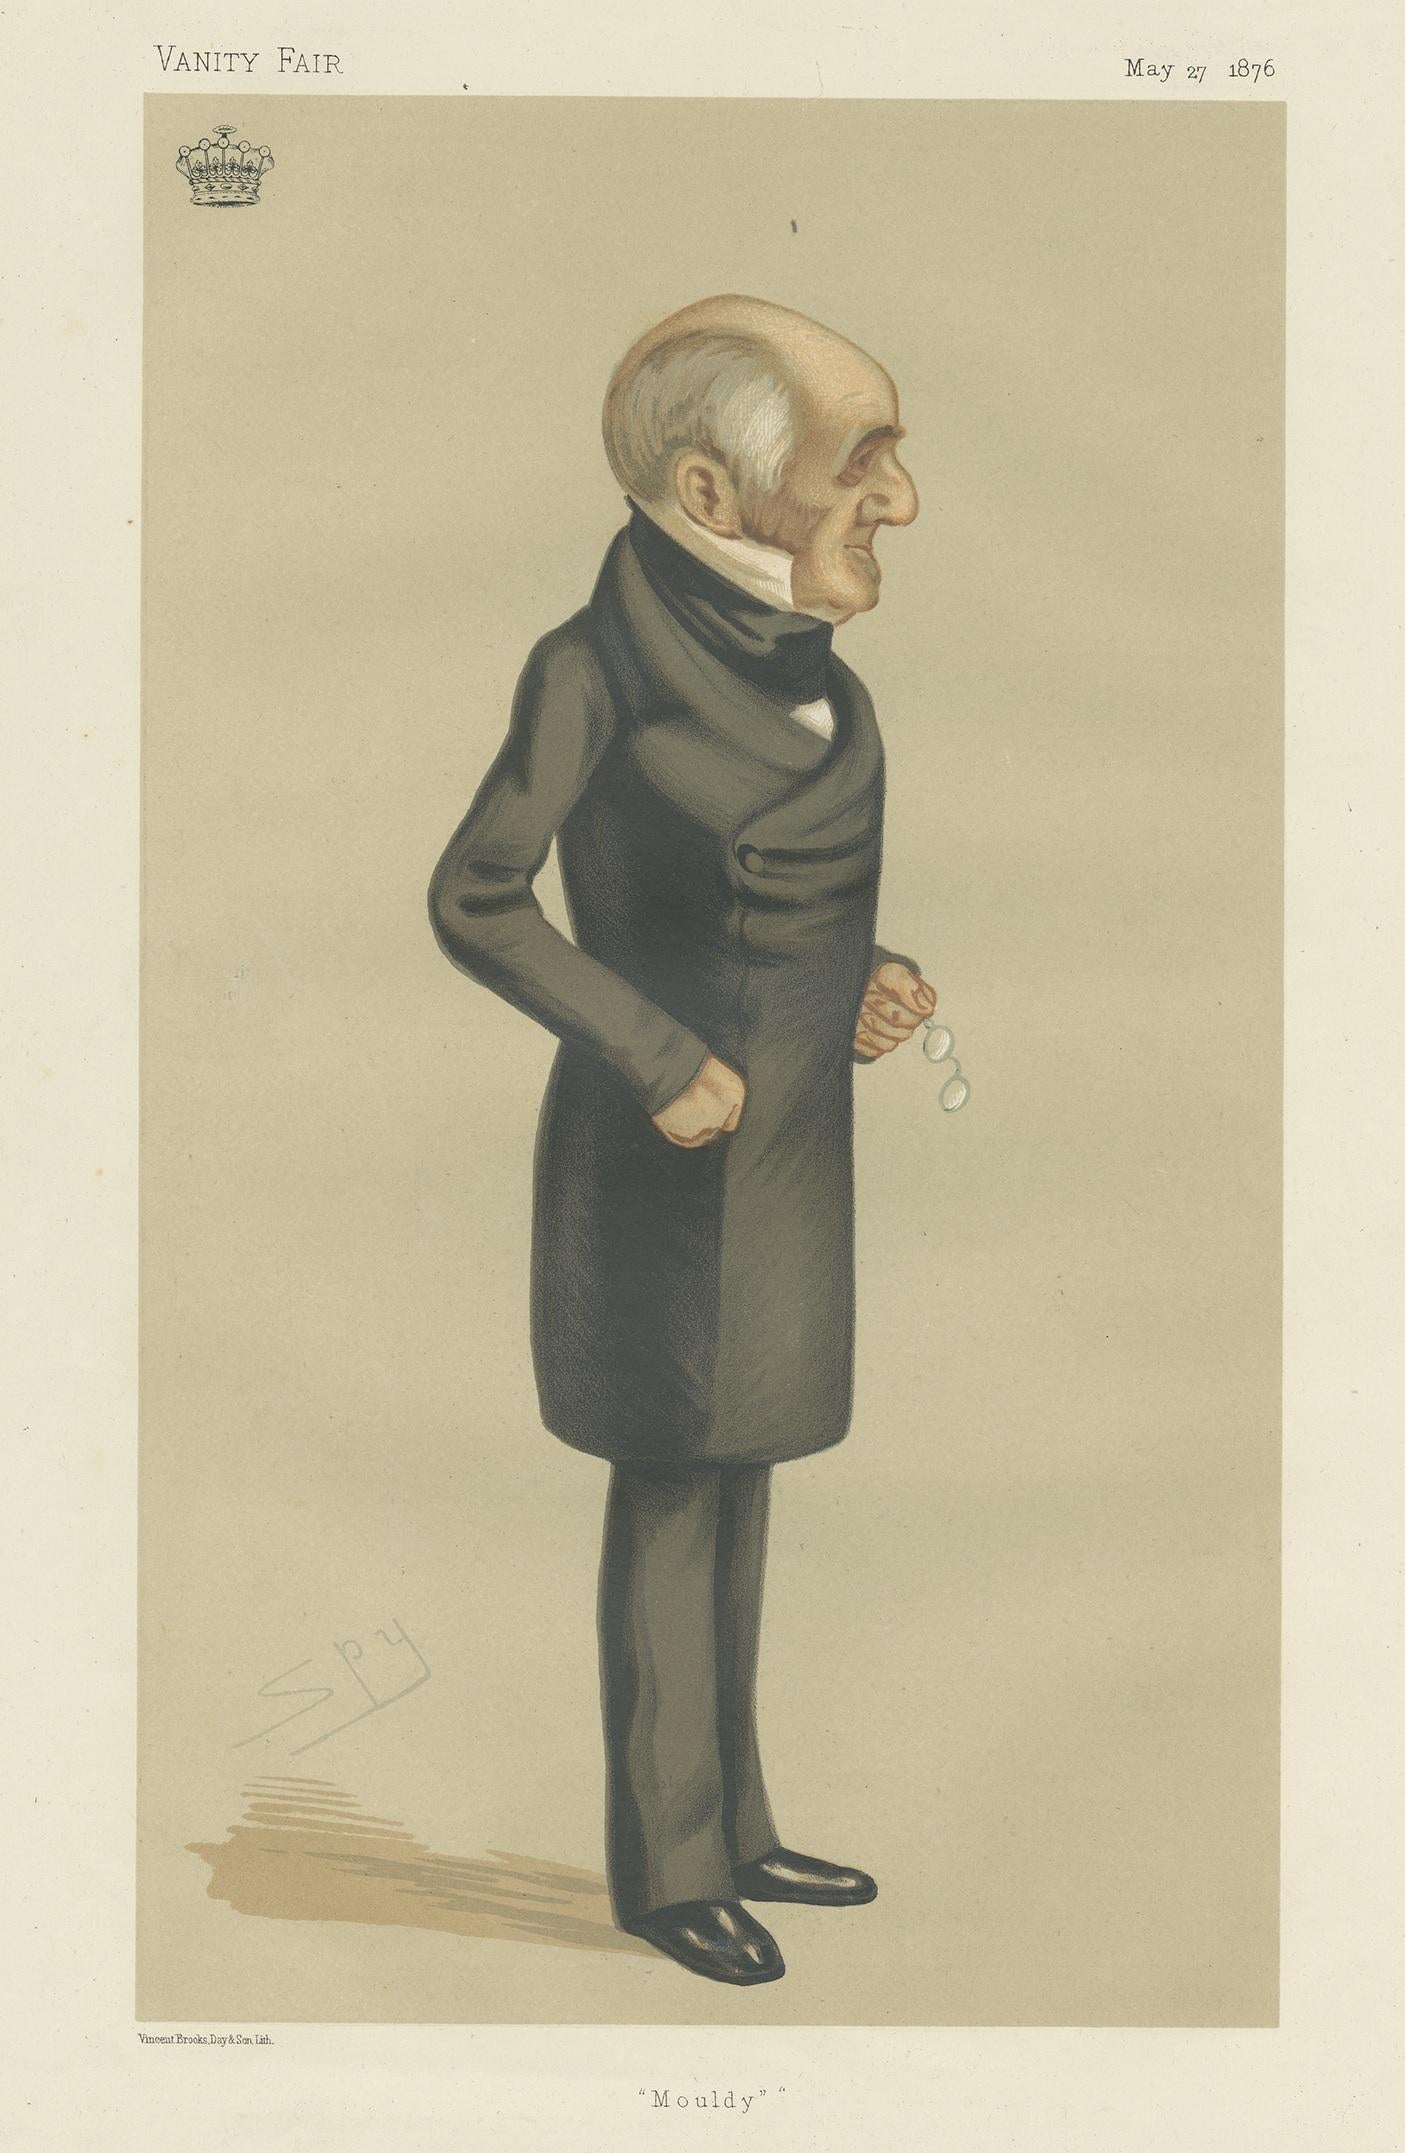 Antique print titled 'Mouldy'. Edward James Herbert, 3rd Earl of Powis (5 November 1818–7 May 1891), styled Viscount Clive between 1839 and 1848, was a British peer and politician. This caricature print originates from the Vanity Fair of May 27,